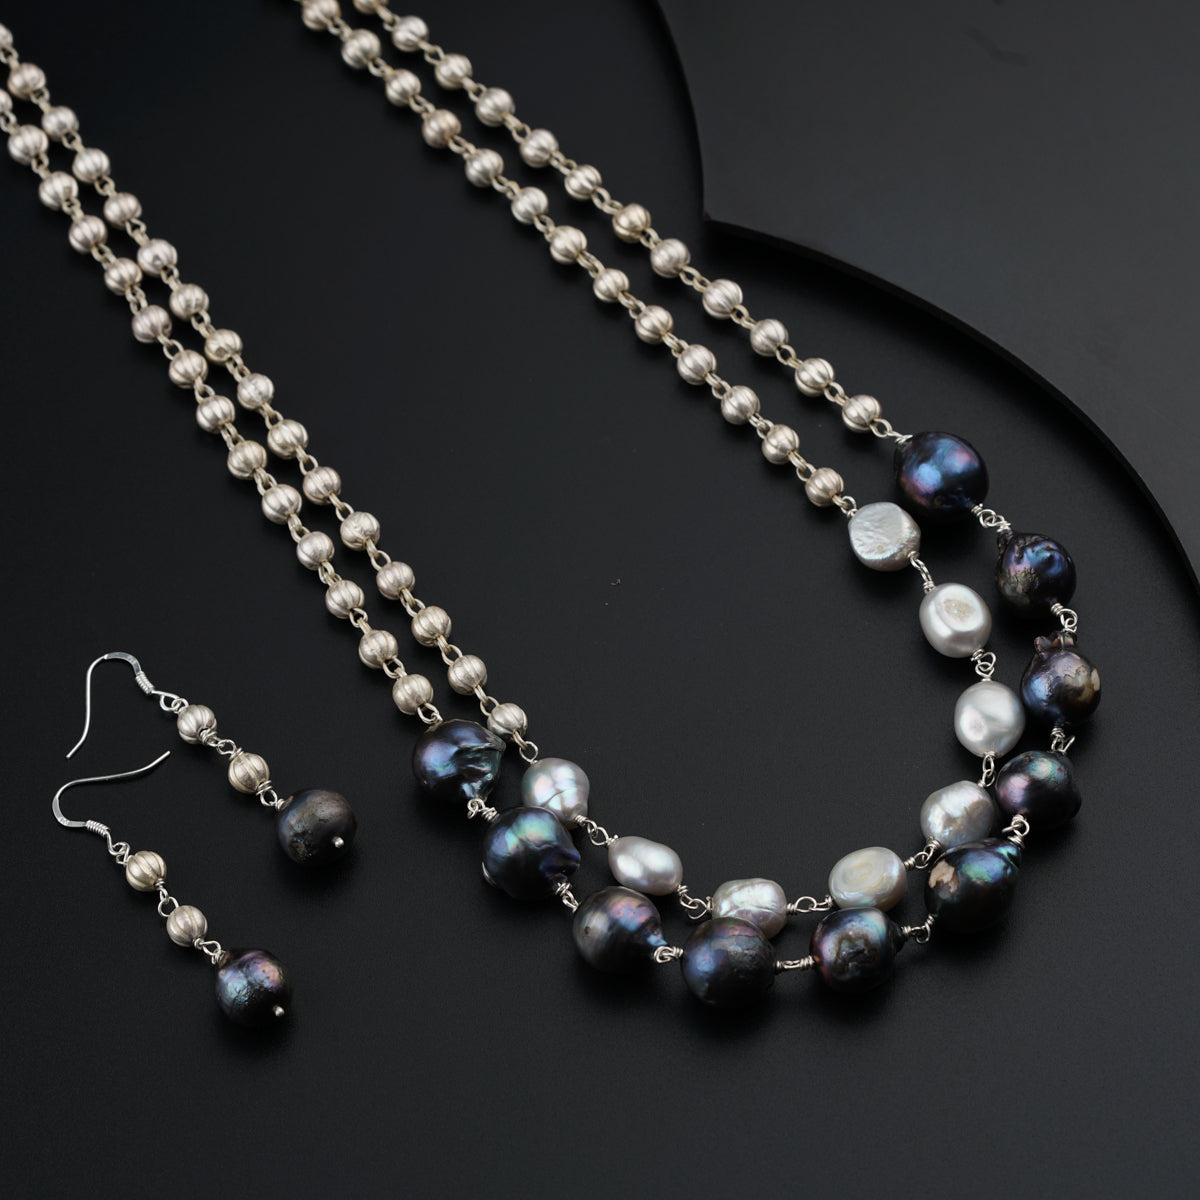 Silver double layered necklace: Pearls and Silver Beads